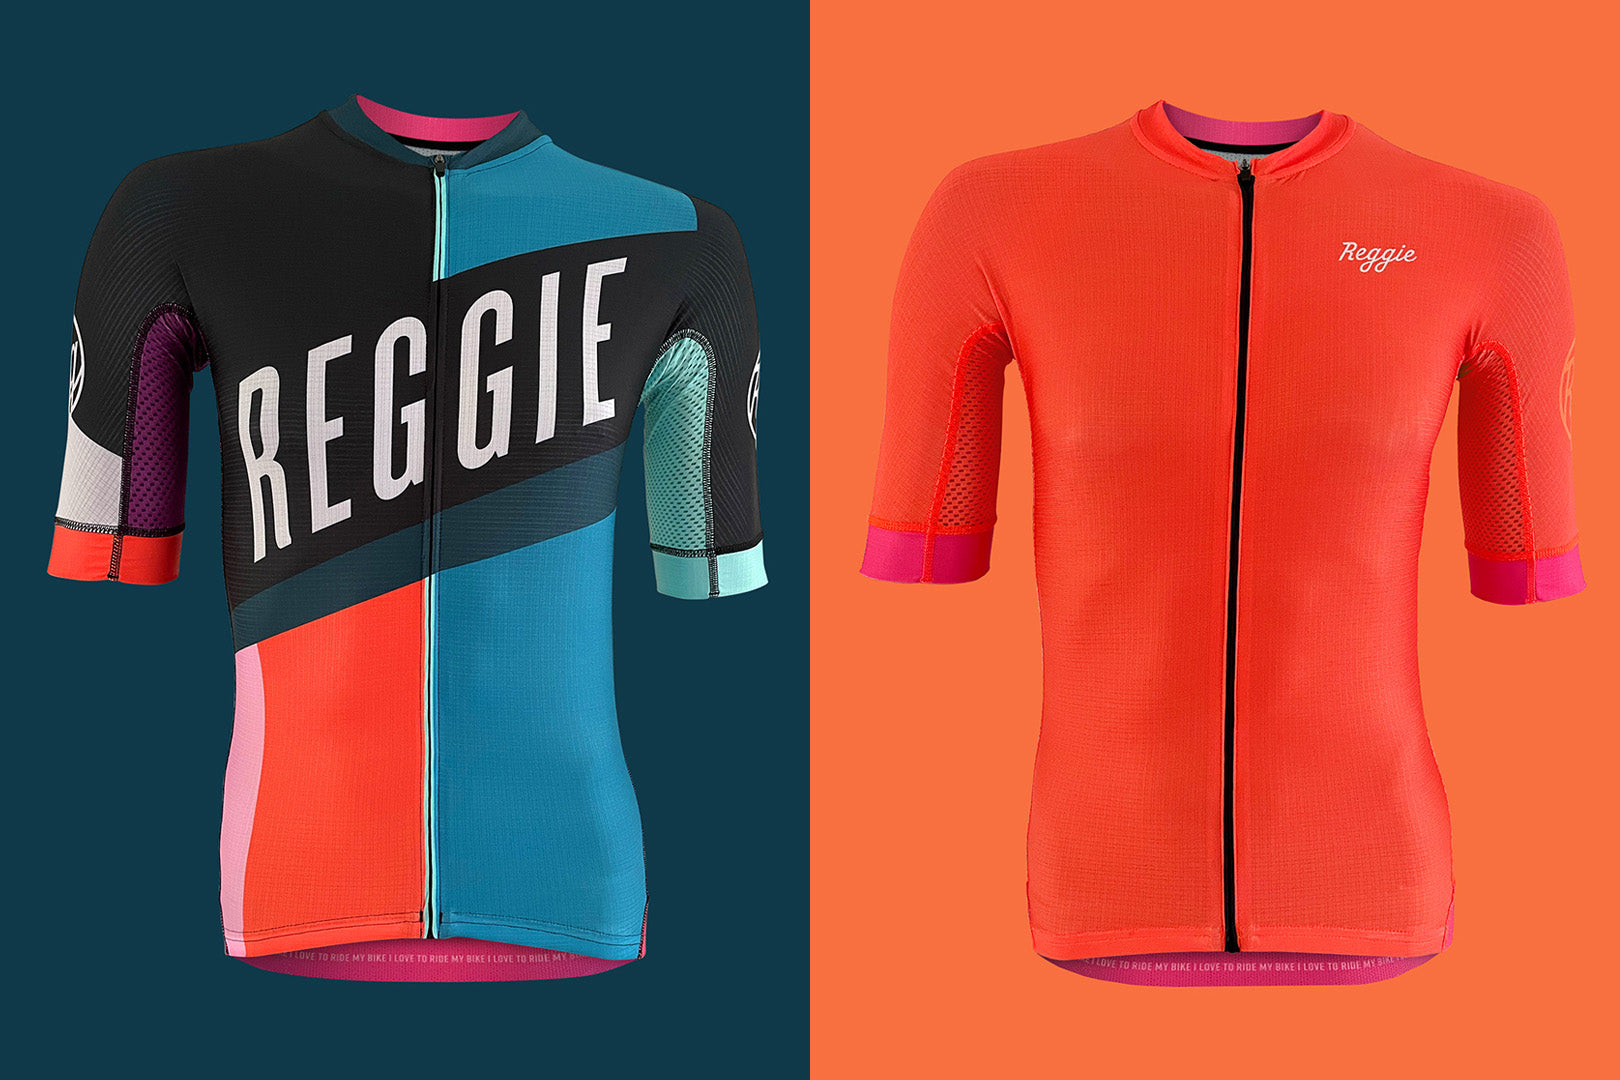 REGGIE Kit Review: A Ride On the Wild Side! - PezCycling News